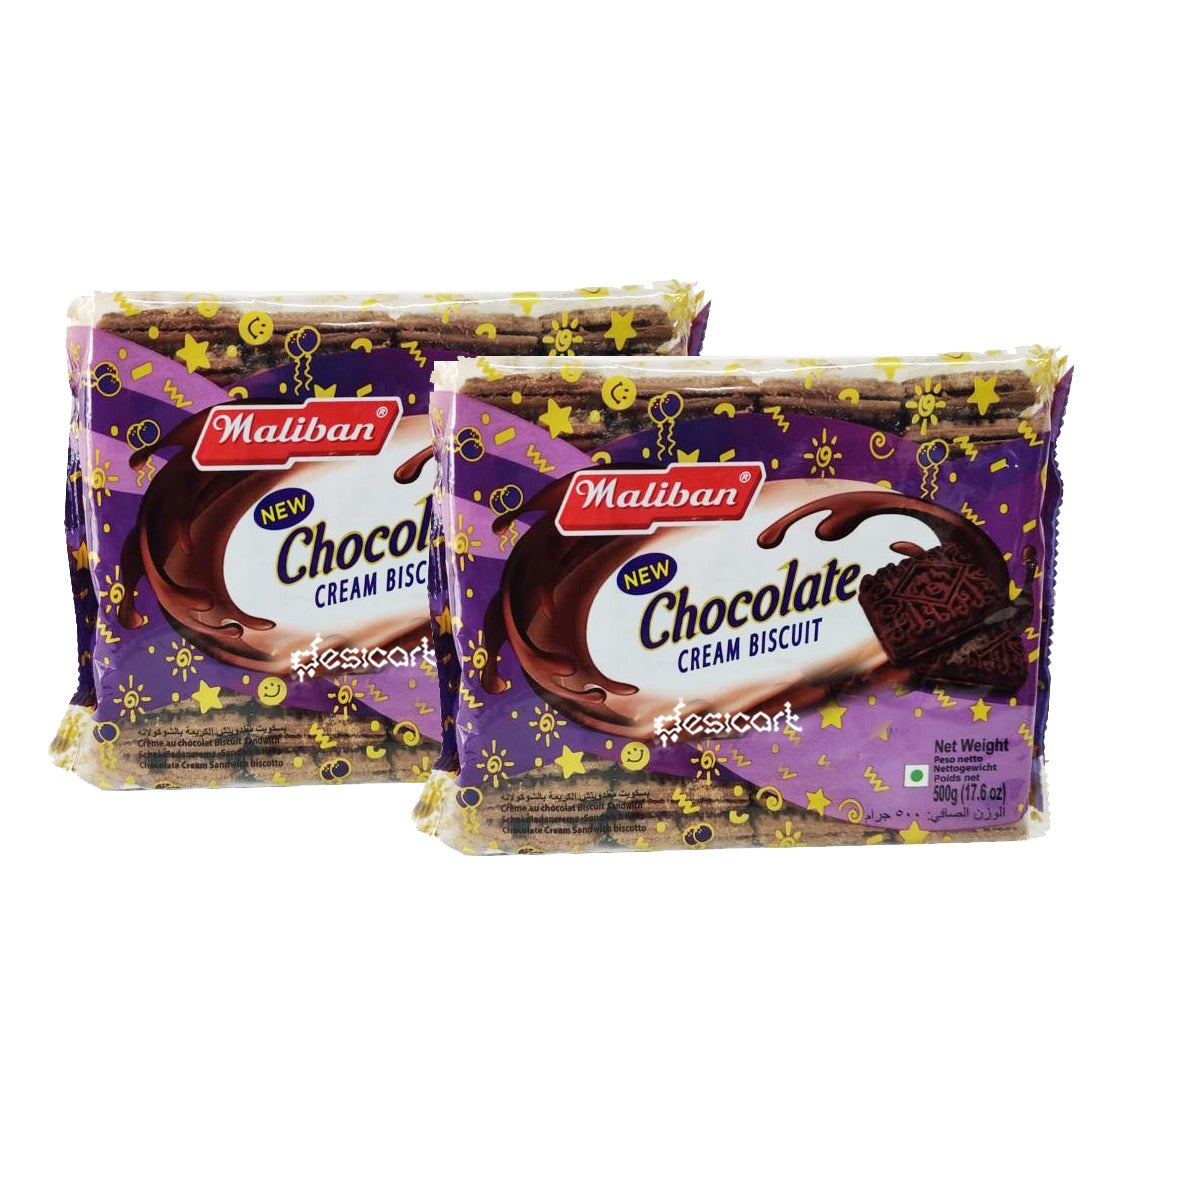 MALIBAN CHOCOLATE CREAM BISCUIT (PACK OF 2) 500G